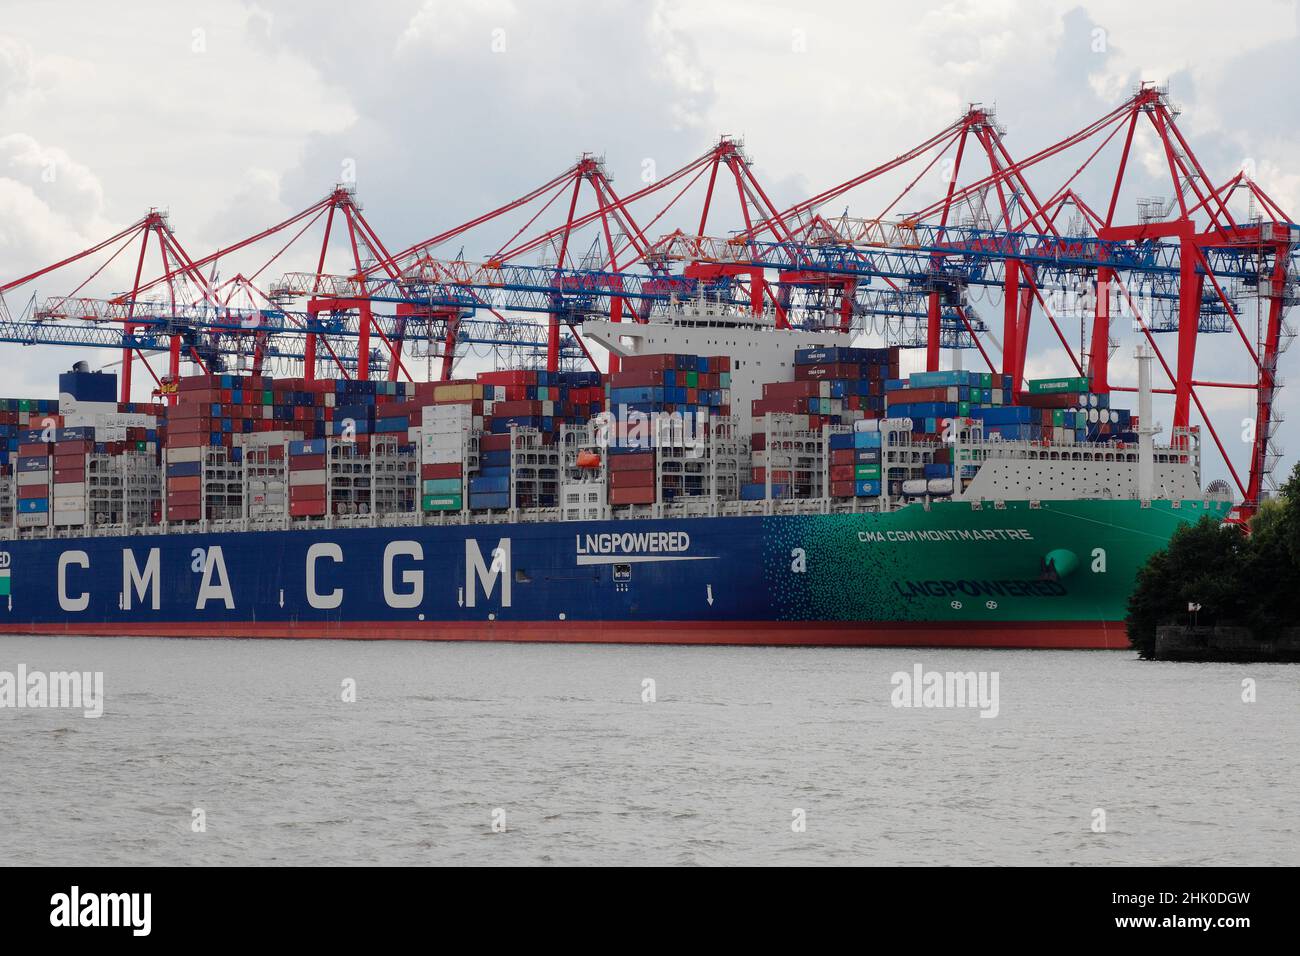 container ship CMA CGM Montmartre in Hamburg, Germany Stock Photo